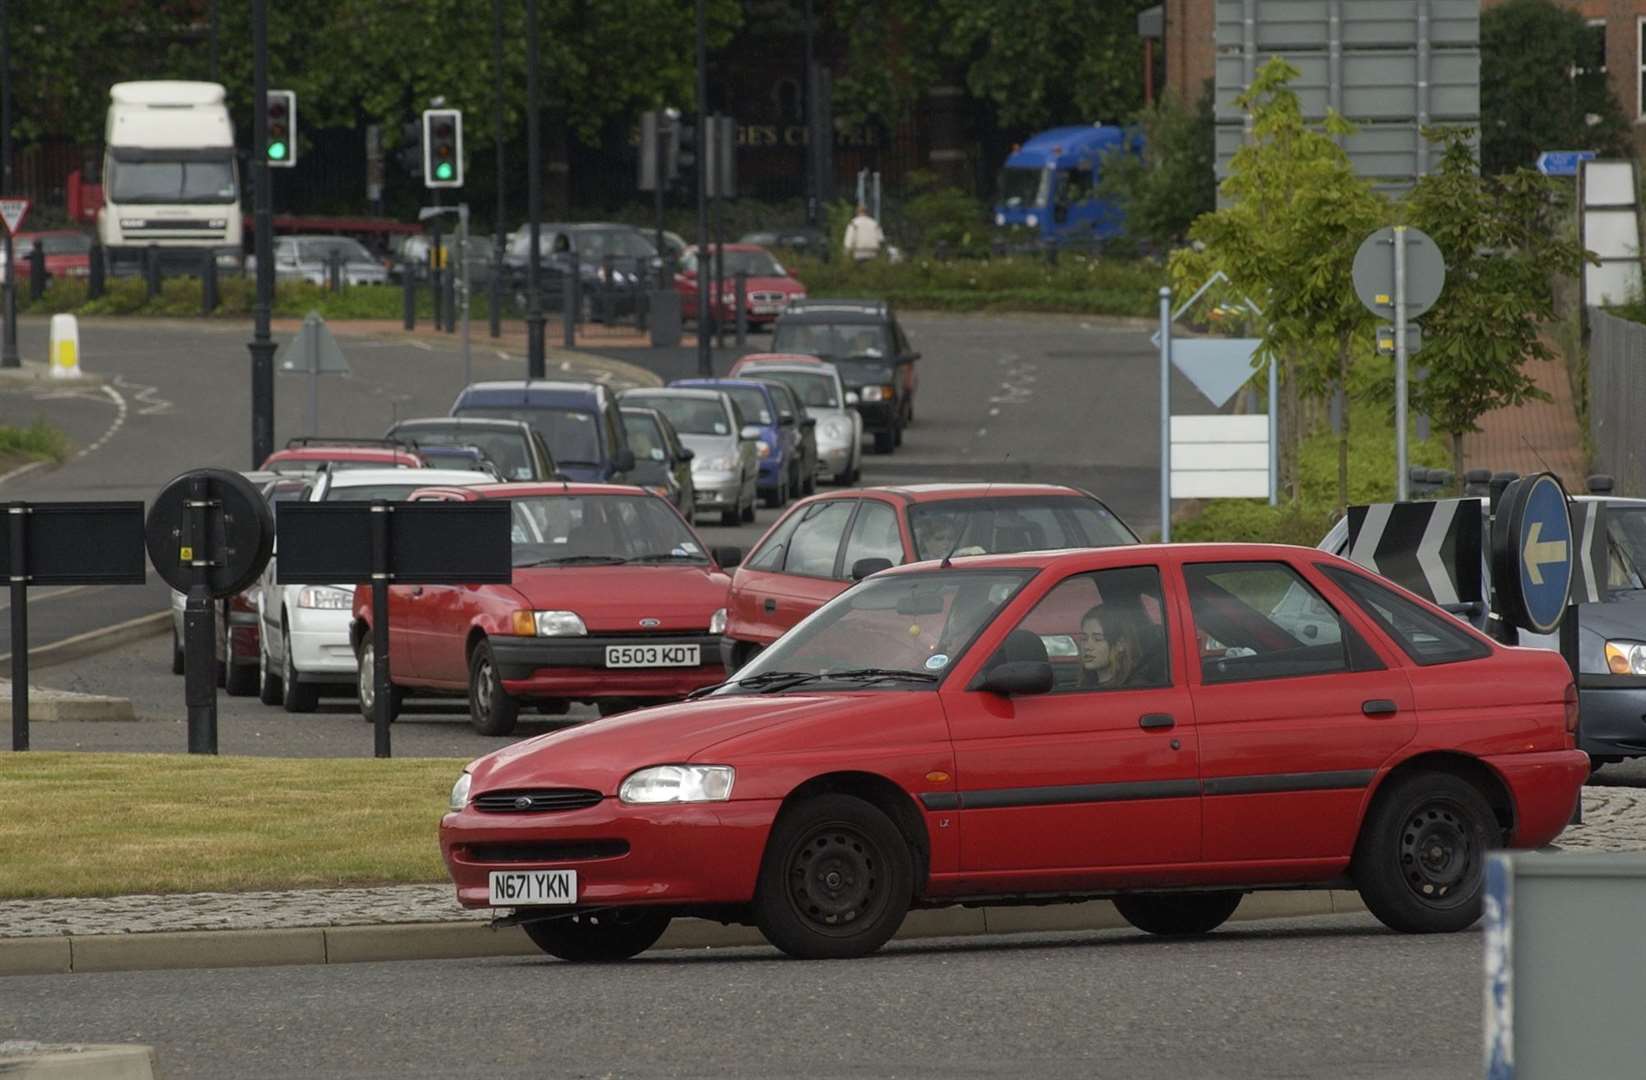 Scores of vehicles made their way into the car park on opening day. Pic: Matthew Walker